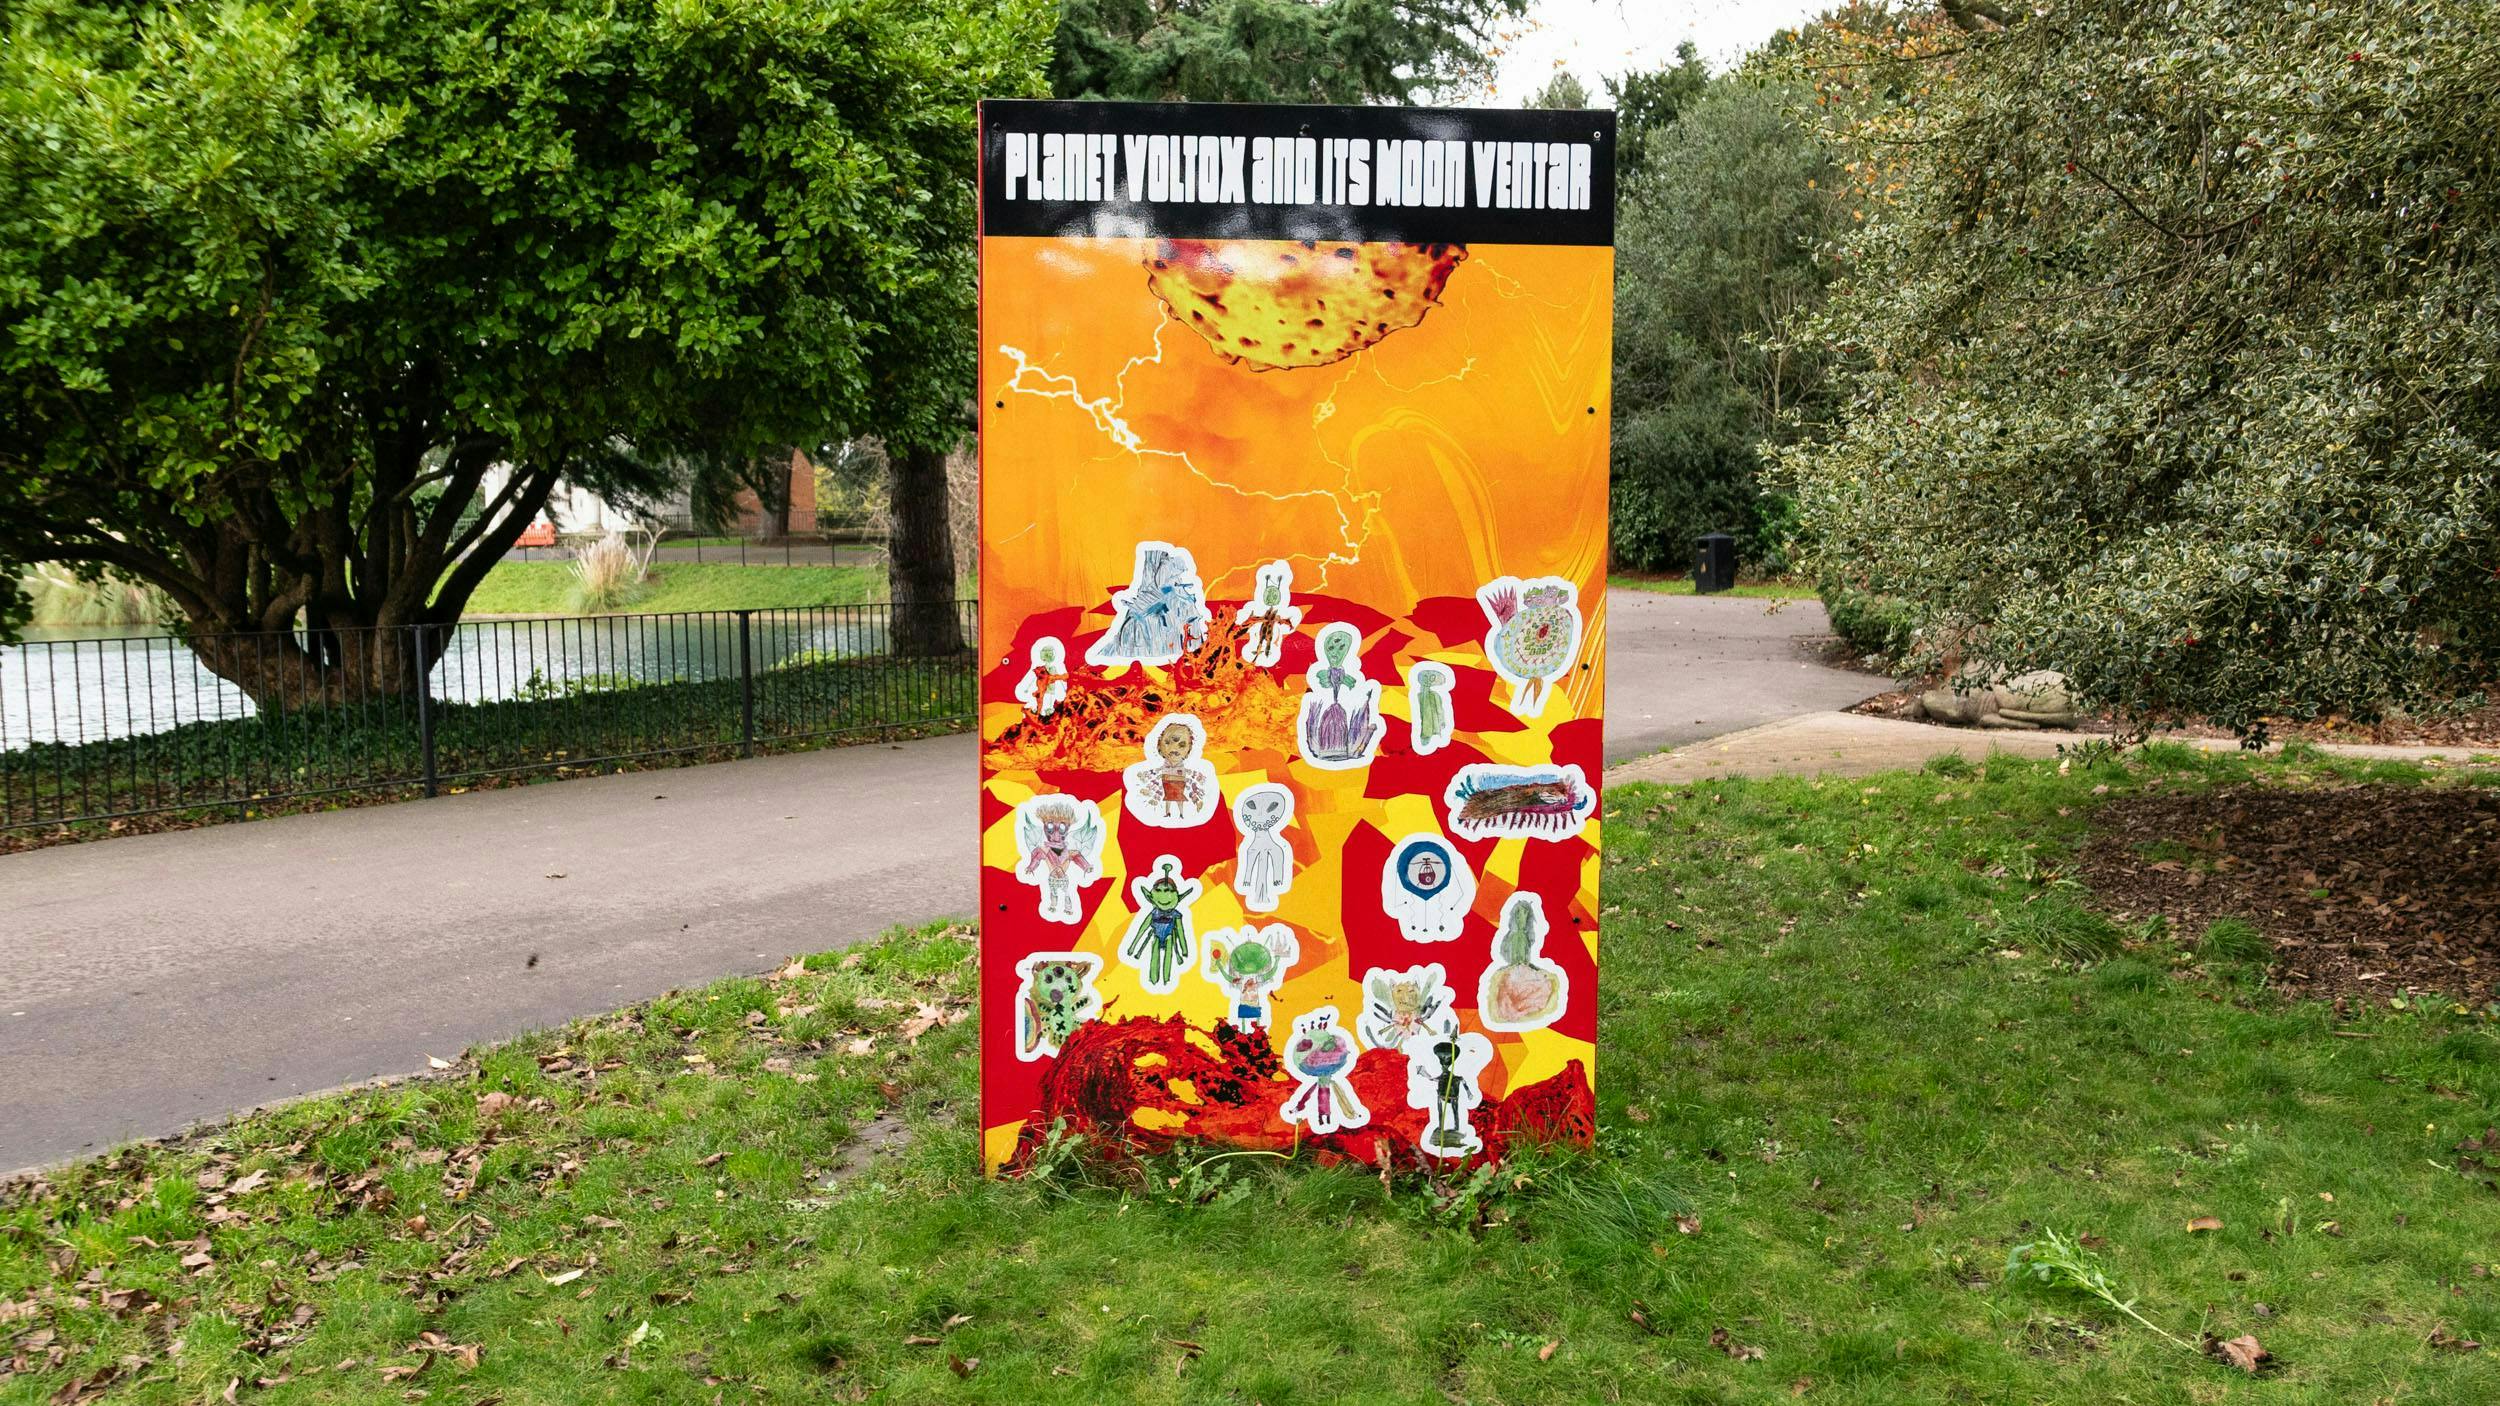 Large orange sign in a green park with 'PLANET VOLTOX AND ITS MOON VENTAR'